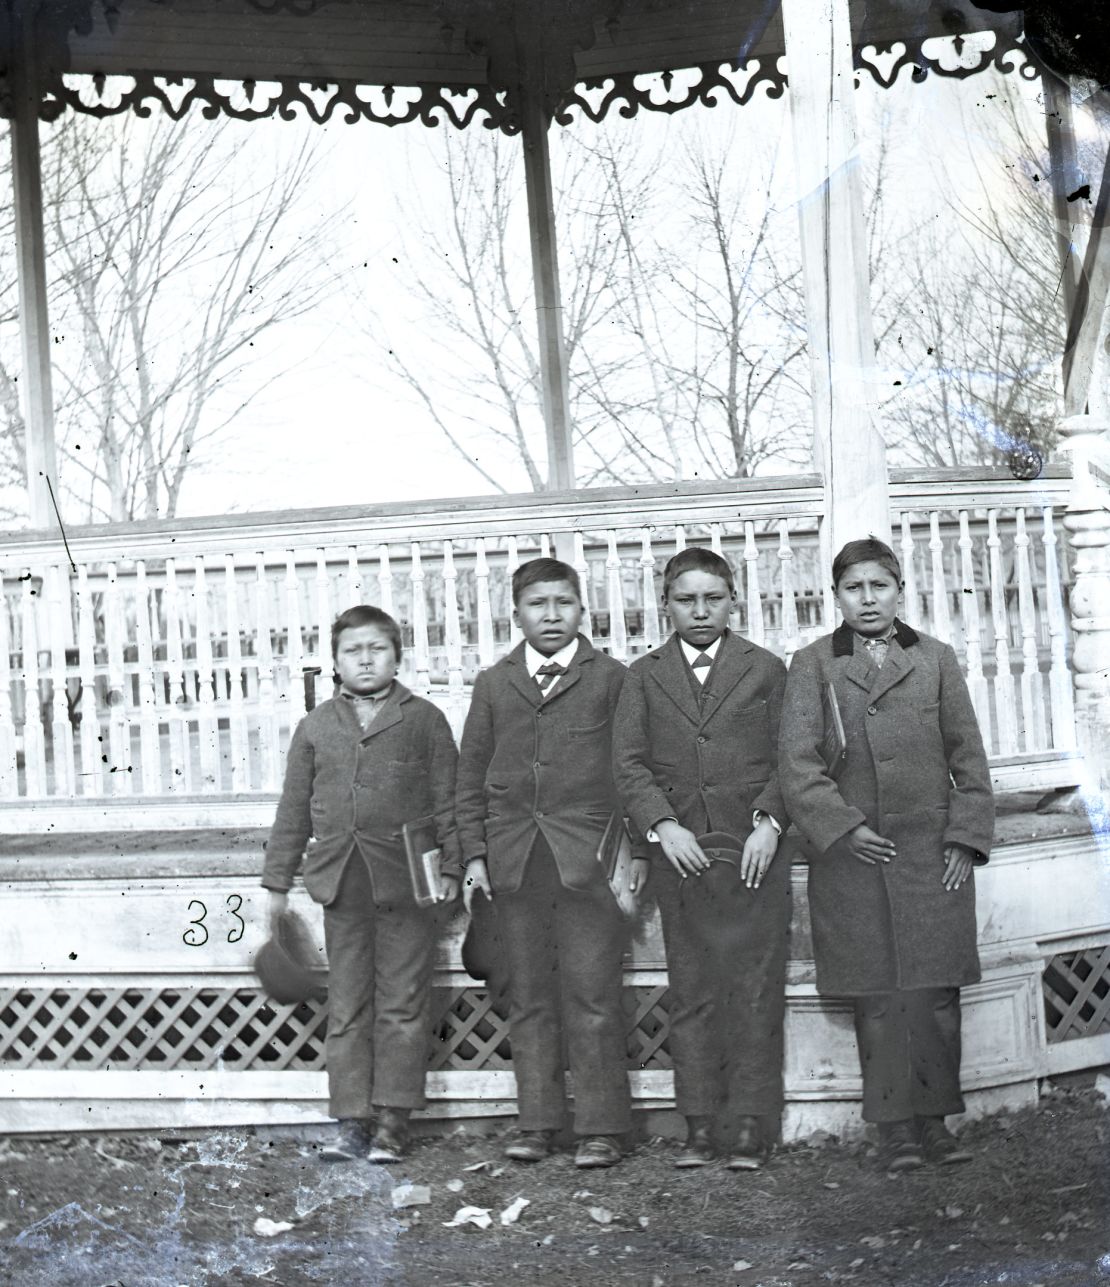 Four boys posing for a photo on the grounds of the Carlisle Indian Industrial School in 1879. Alvan Kills Seven Horses (One That Kills Seven Horses), second from left, was buried there and his remains are among those that will be repatriated to the Rosebud Sioux reservation next week.